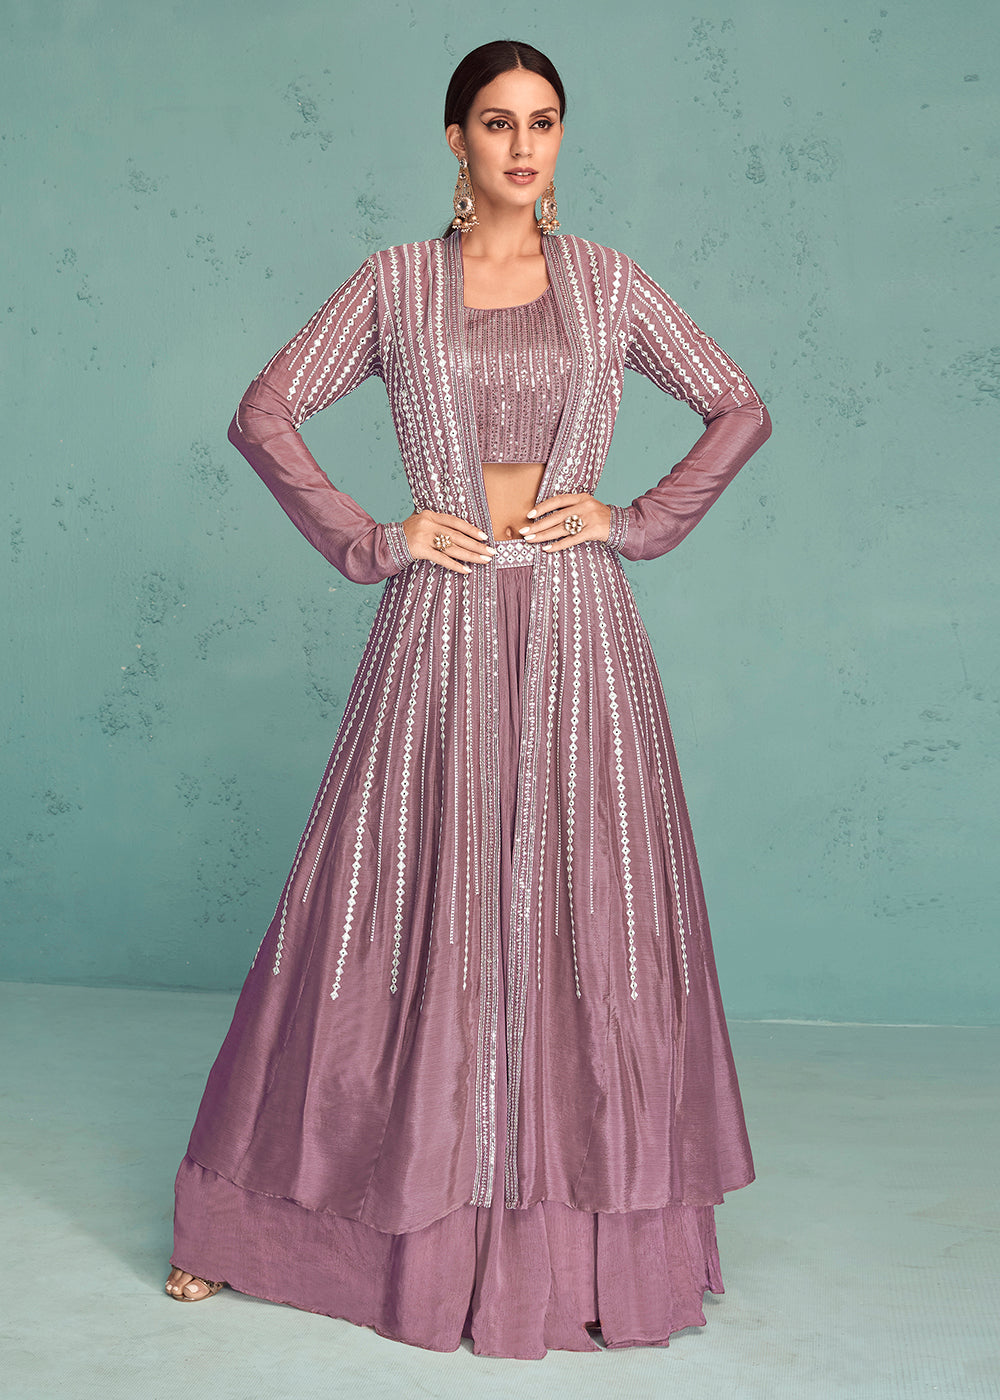 Shop Now Dusty Mauve Indo-Western Jacket Style Georgette Skirt Dress Online in USA, UK, Canada & Worldwide at Empress Clothing. 